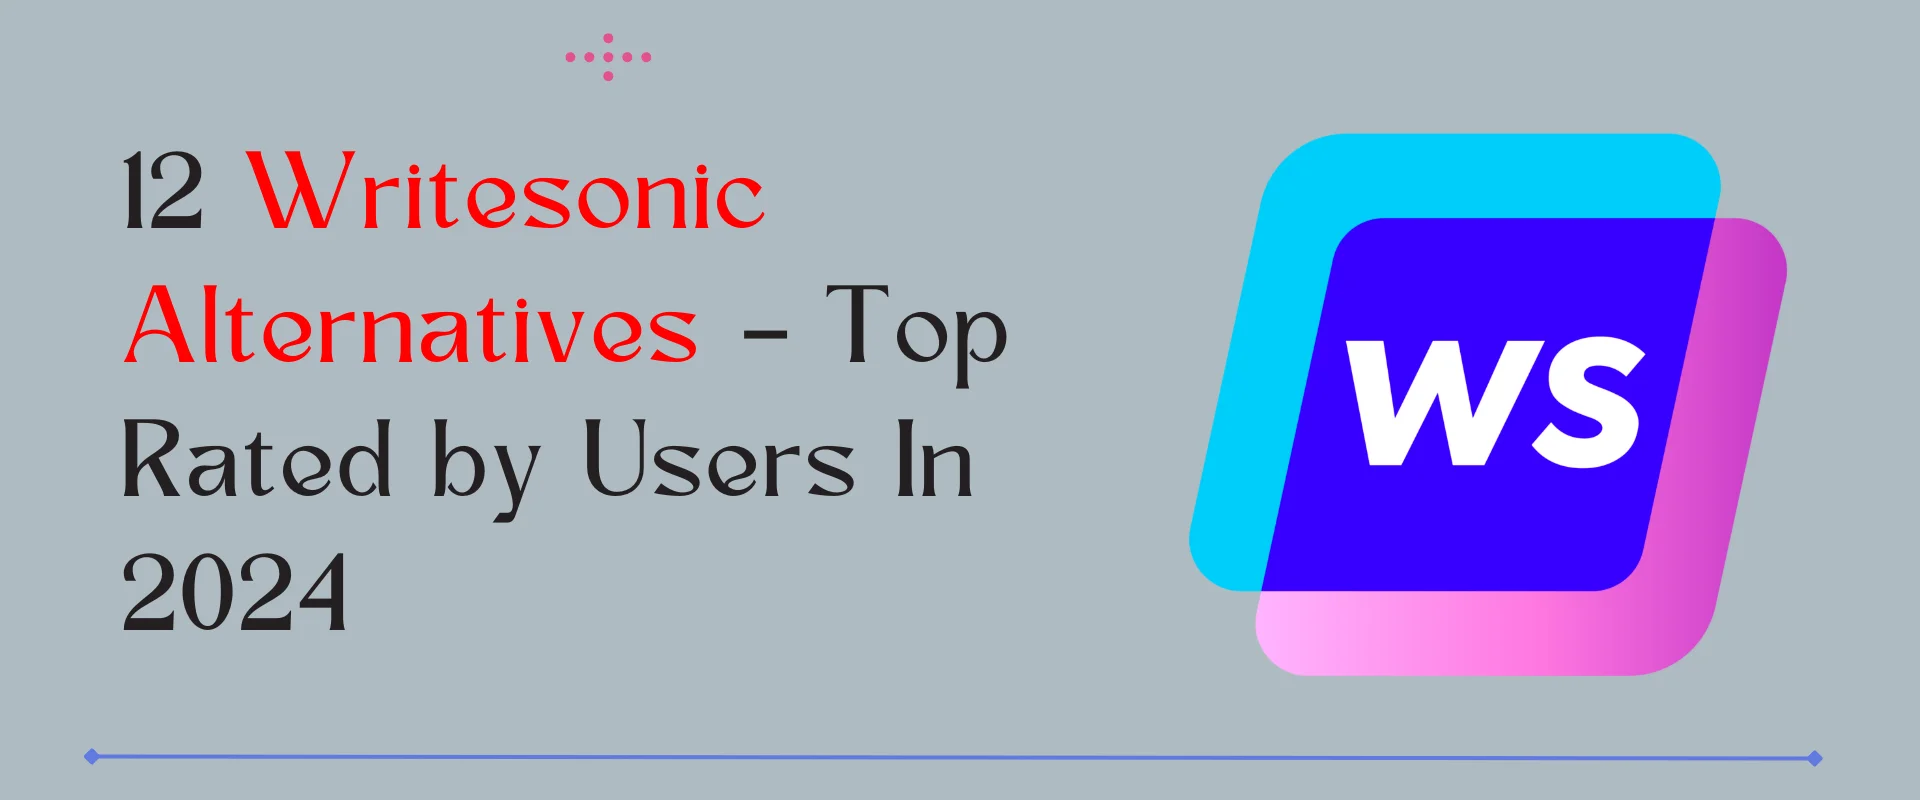 12 Writesonic Alternatives – Top Rated by Users In 2024